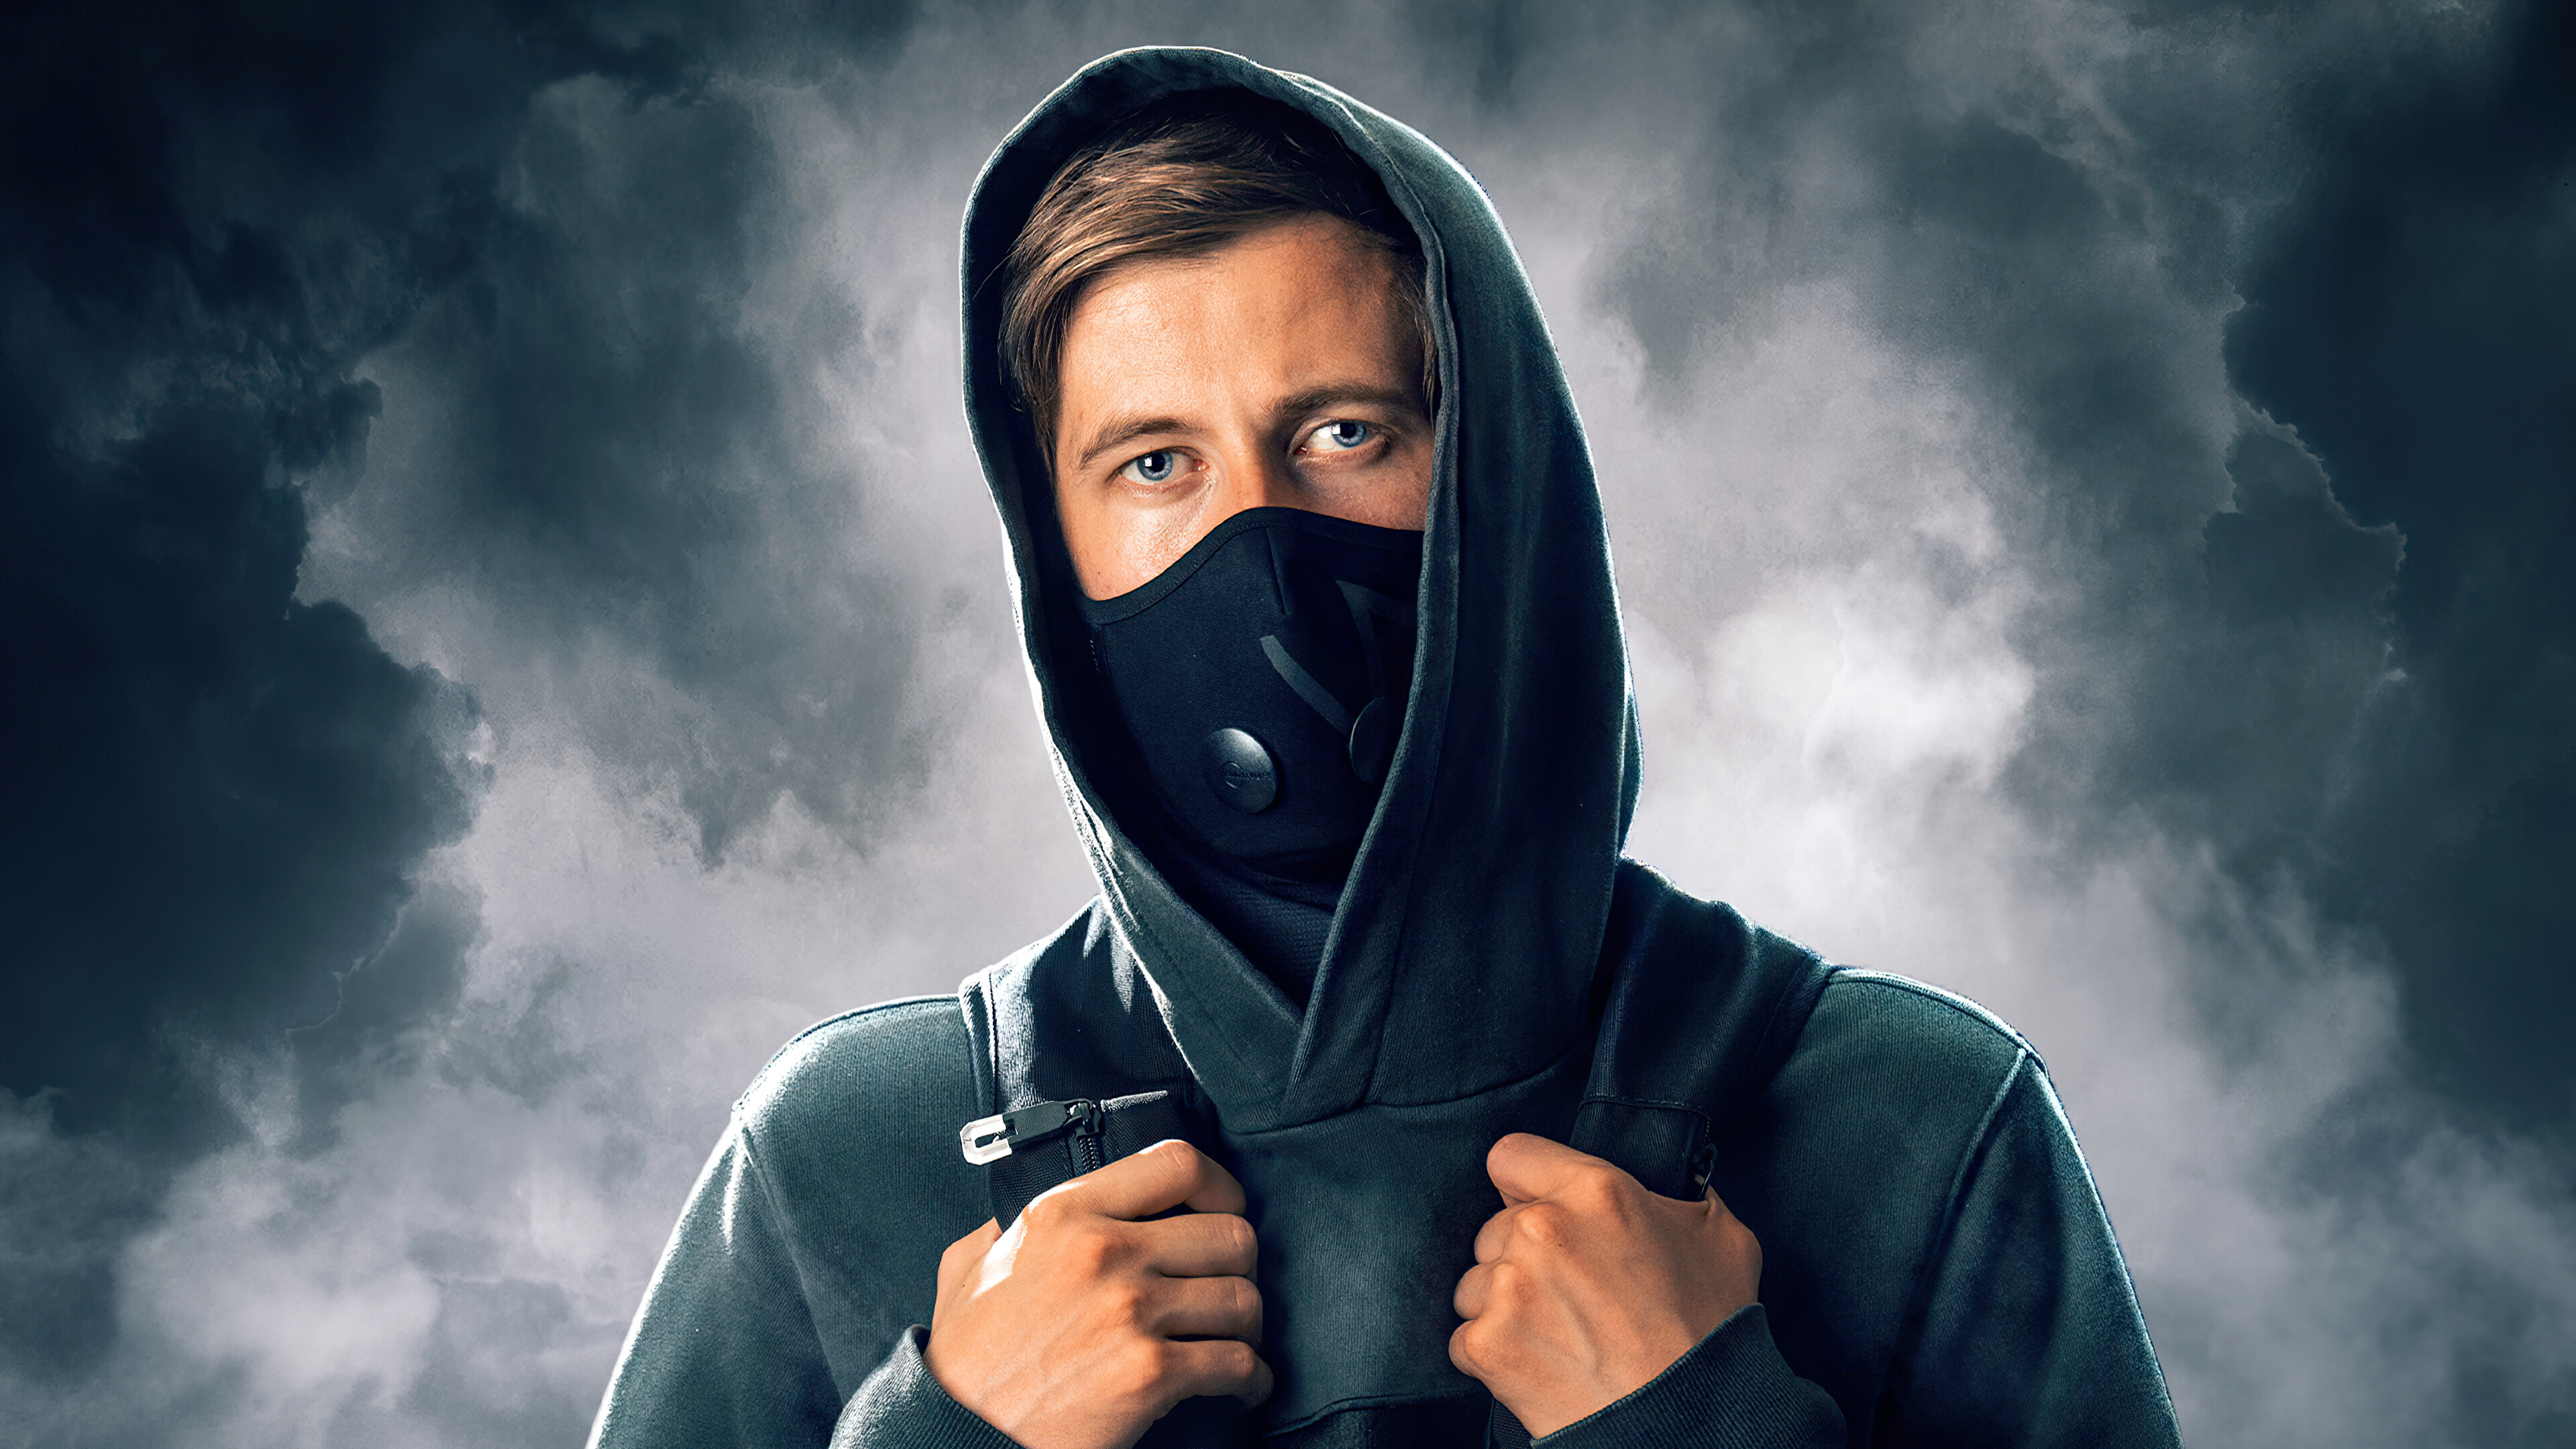 Alan Walker: Made his performance debut at the Winter X Games, Oslo. 3840x2160 4K Background.